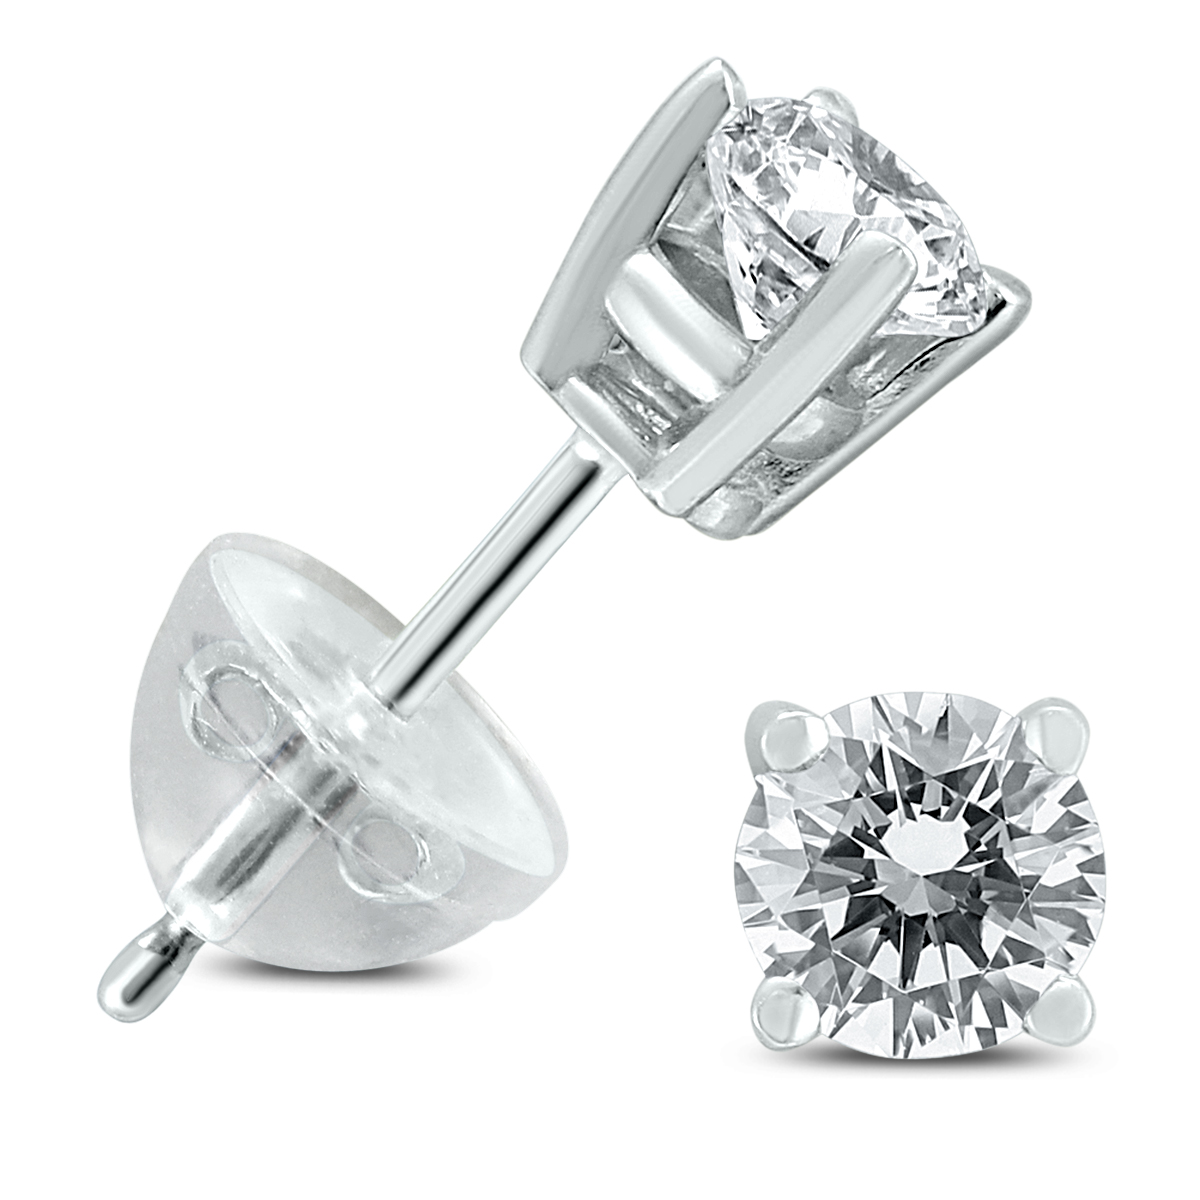 .45CTW Round Diamond Solitaire Stud Earrings In 14k White Gold with Silicon Backs